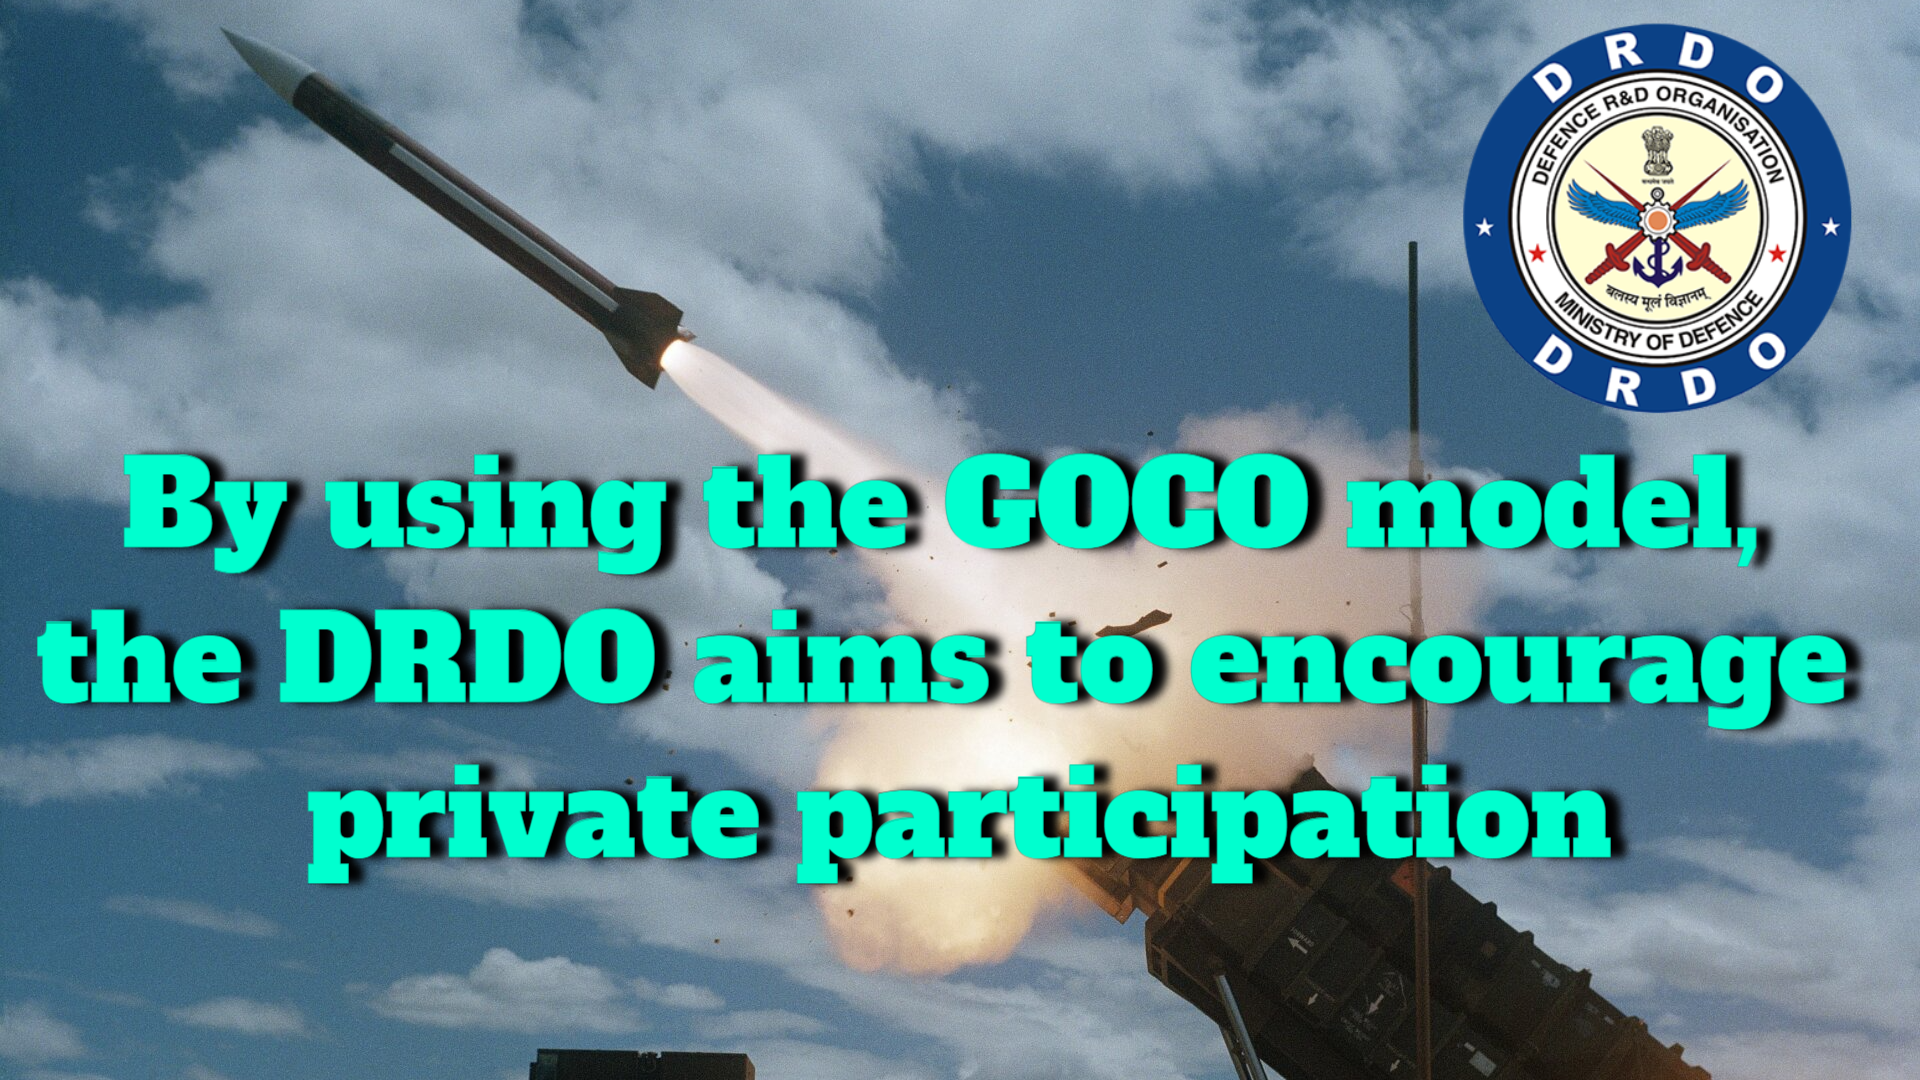 To encourage private participation, the DRDO has adopted the GOCO model